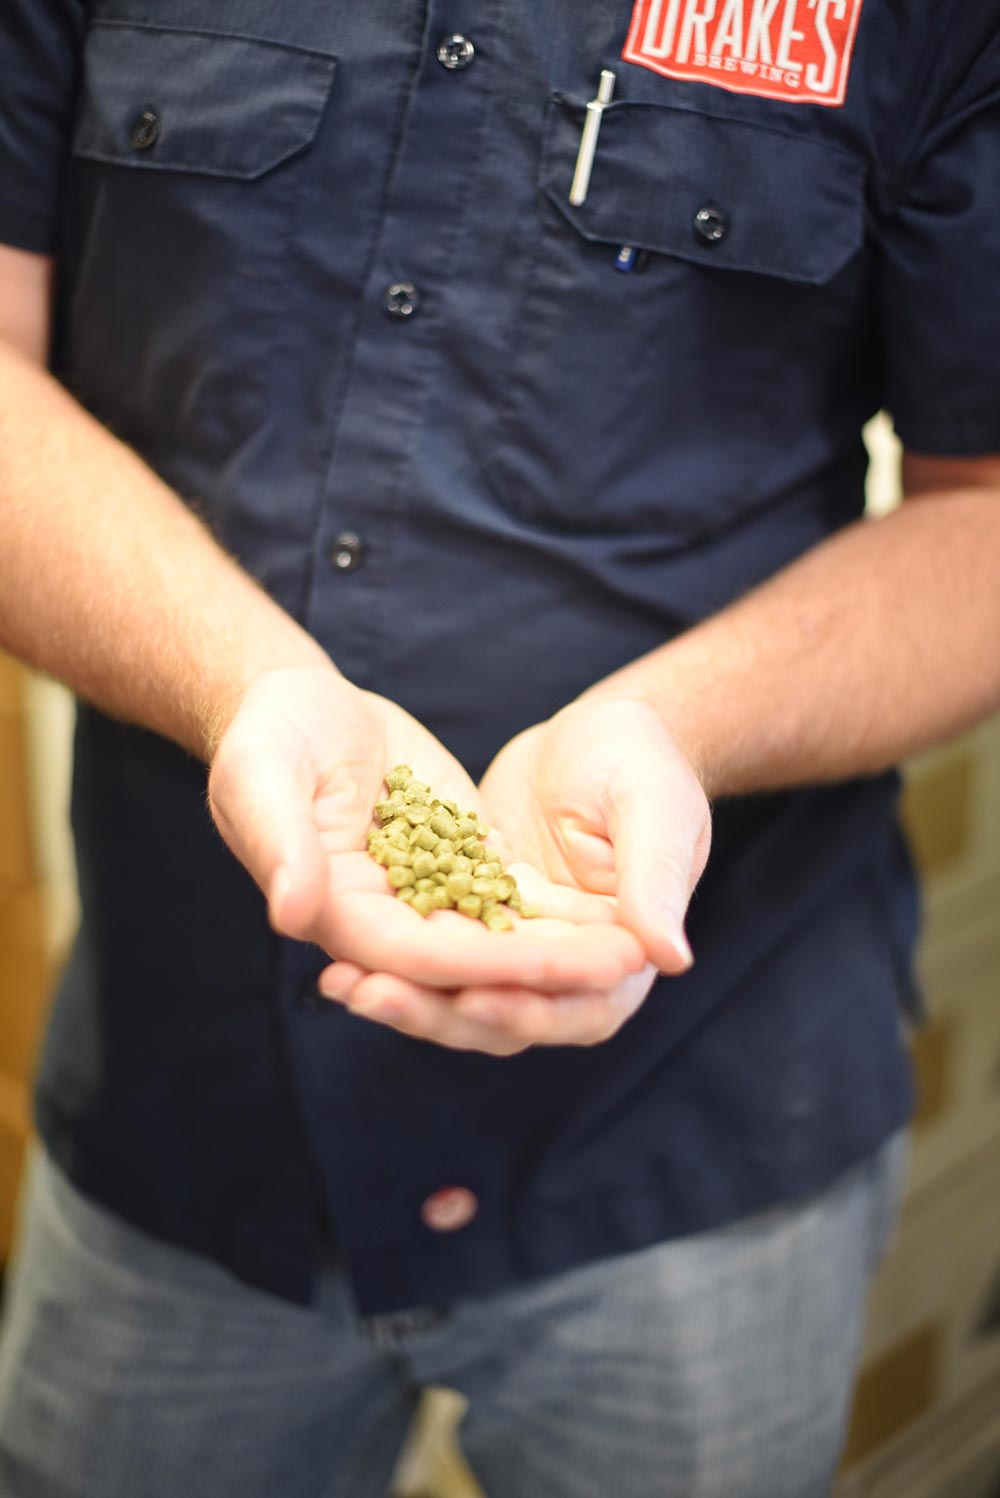 Dunstan holds the hops that are integral to the beer making at Drake's 